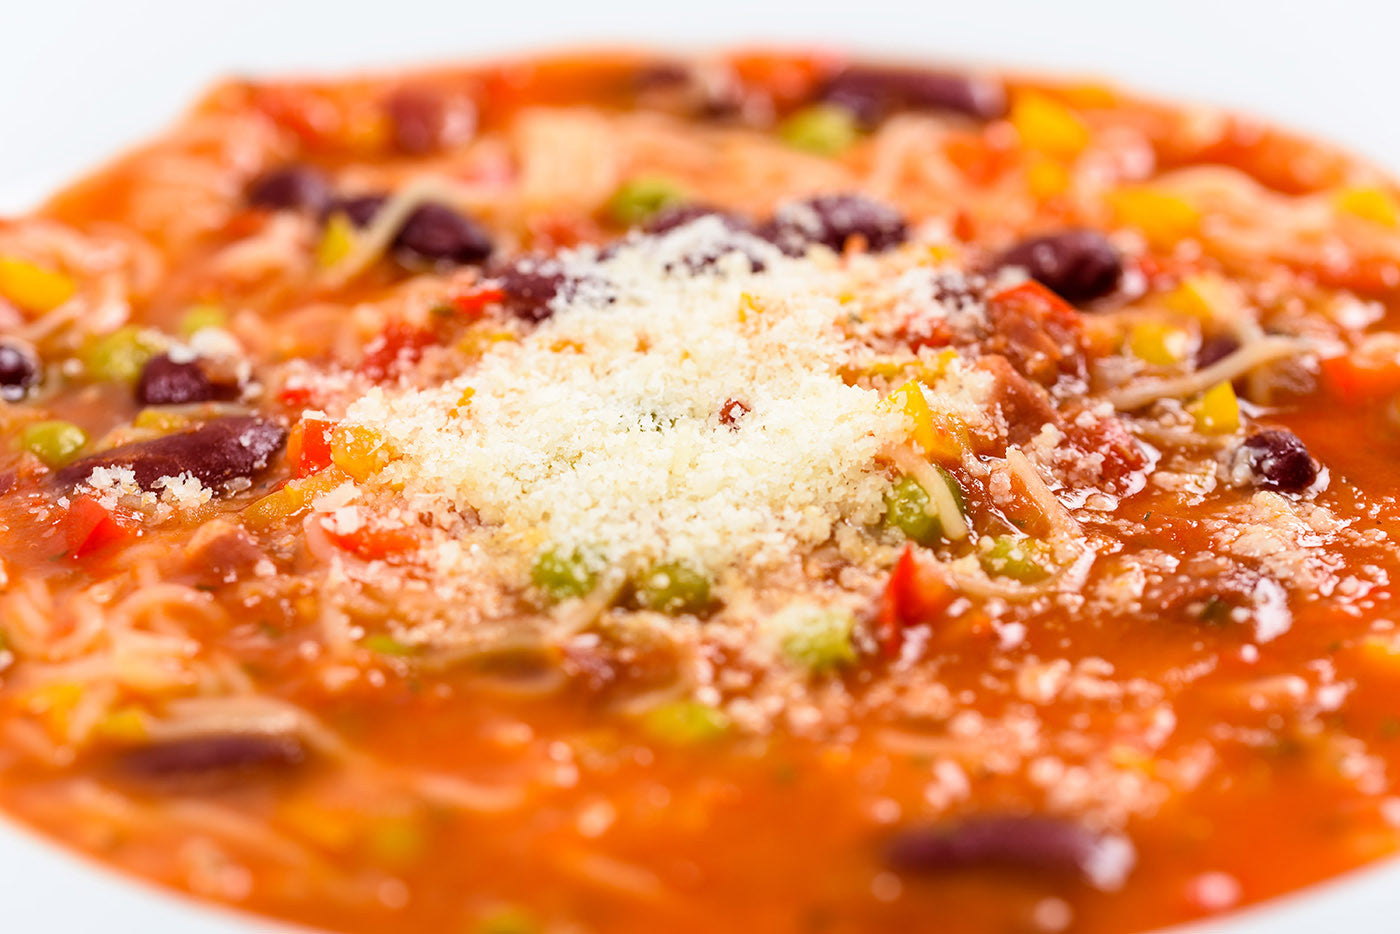 Soup Sunday! Hearty, Authentic, Traditional, Italian Vegetable Minestrone